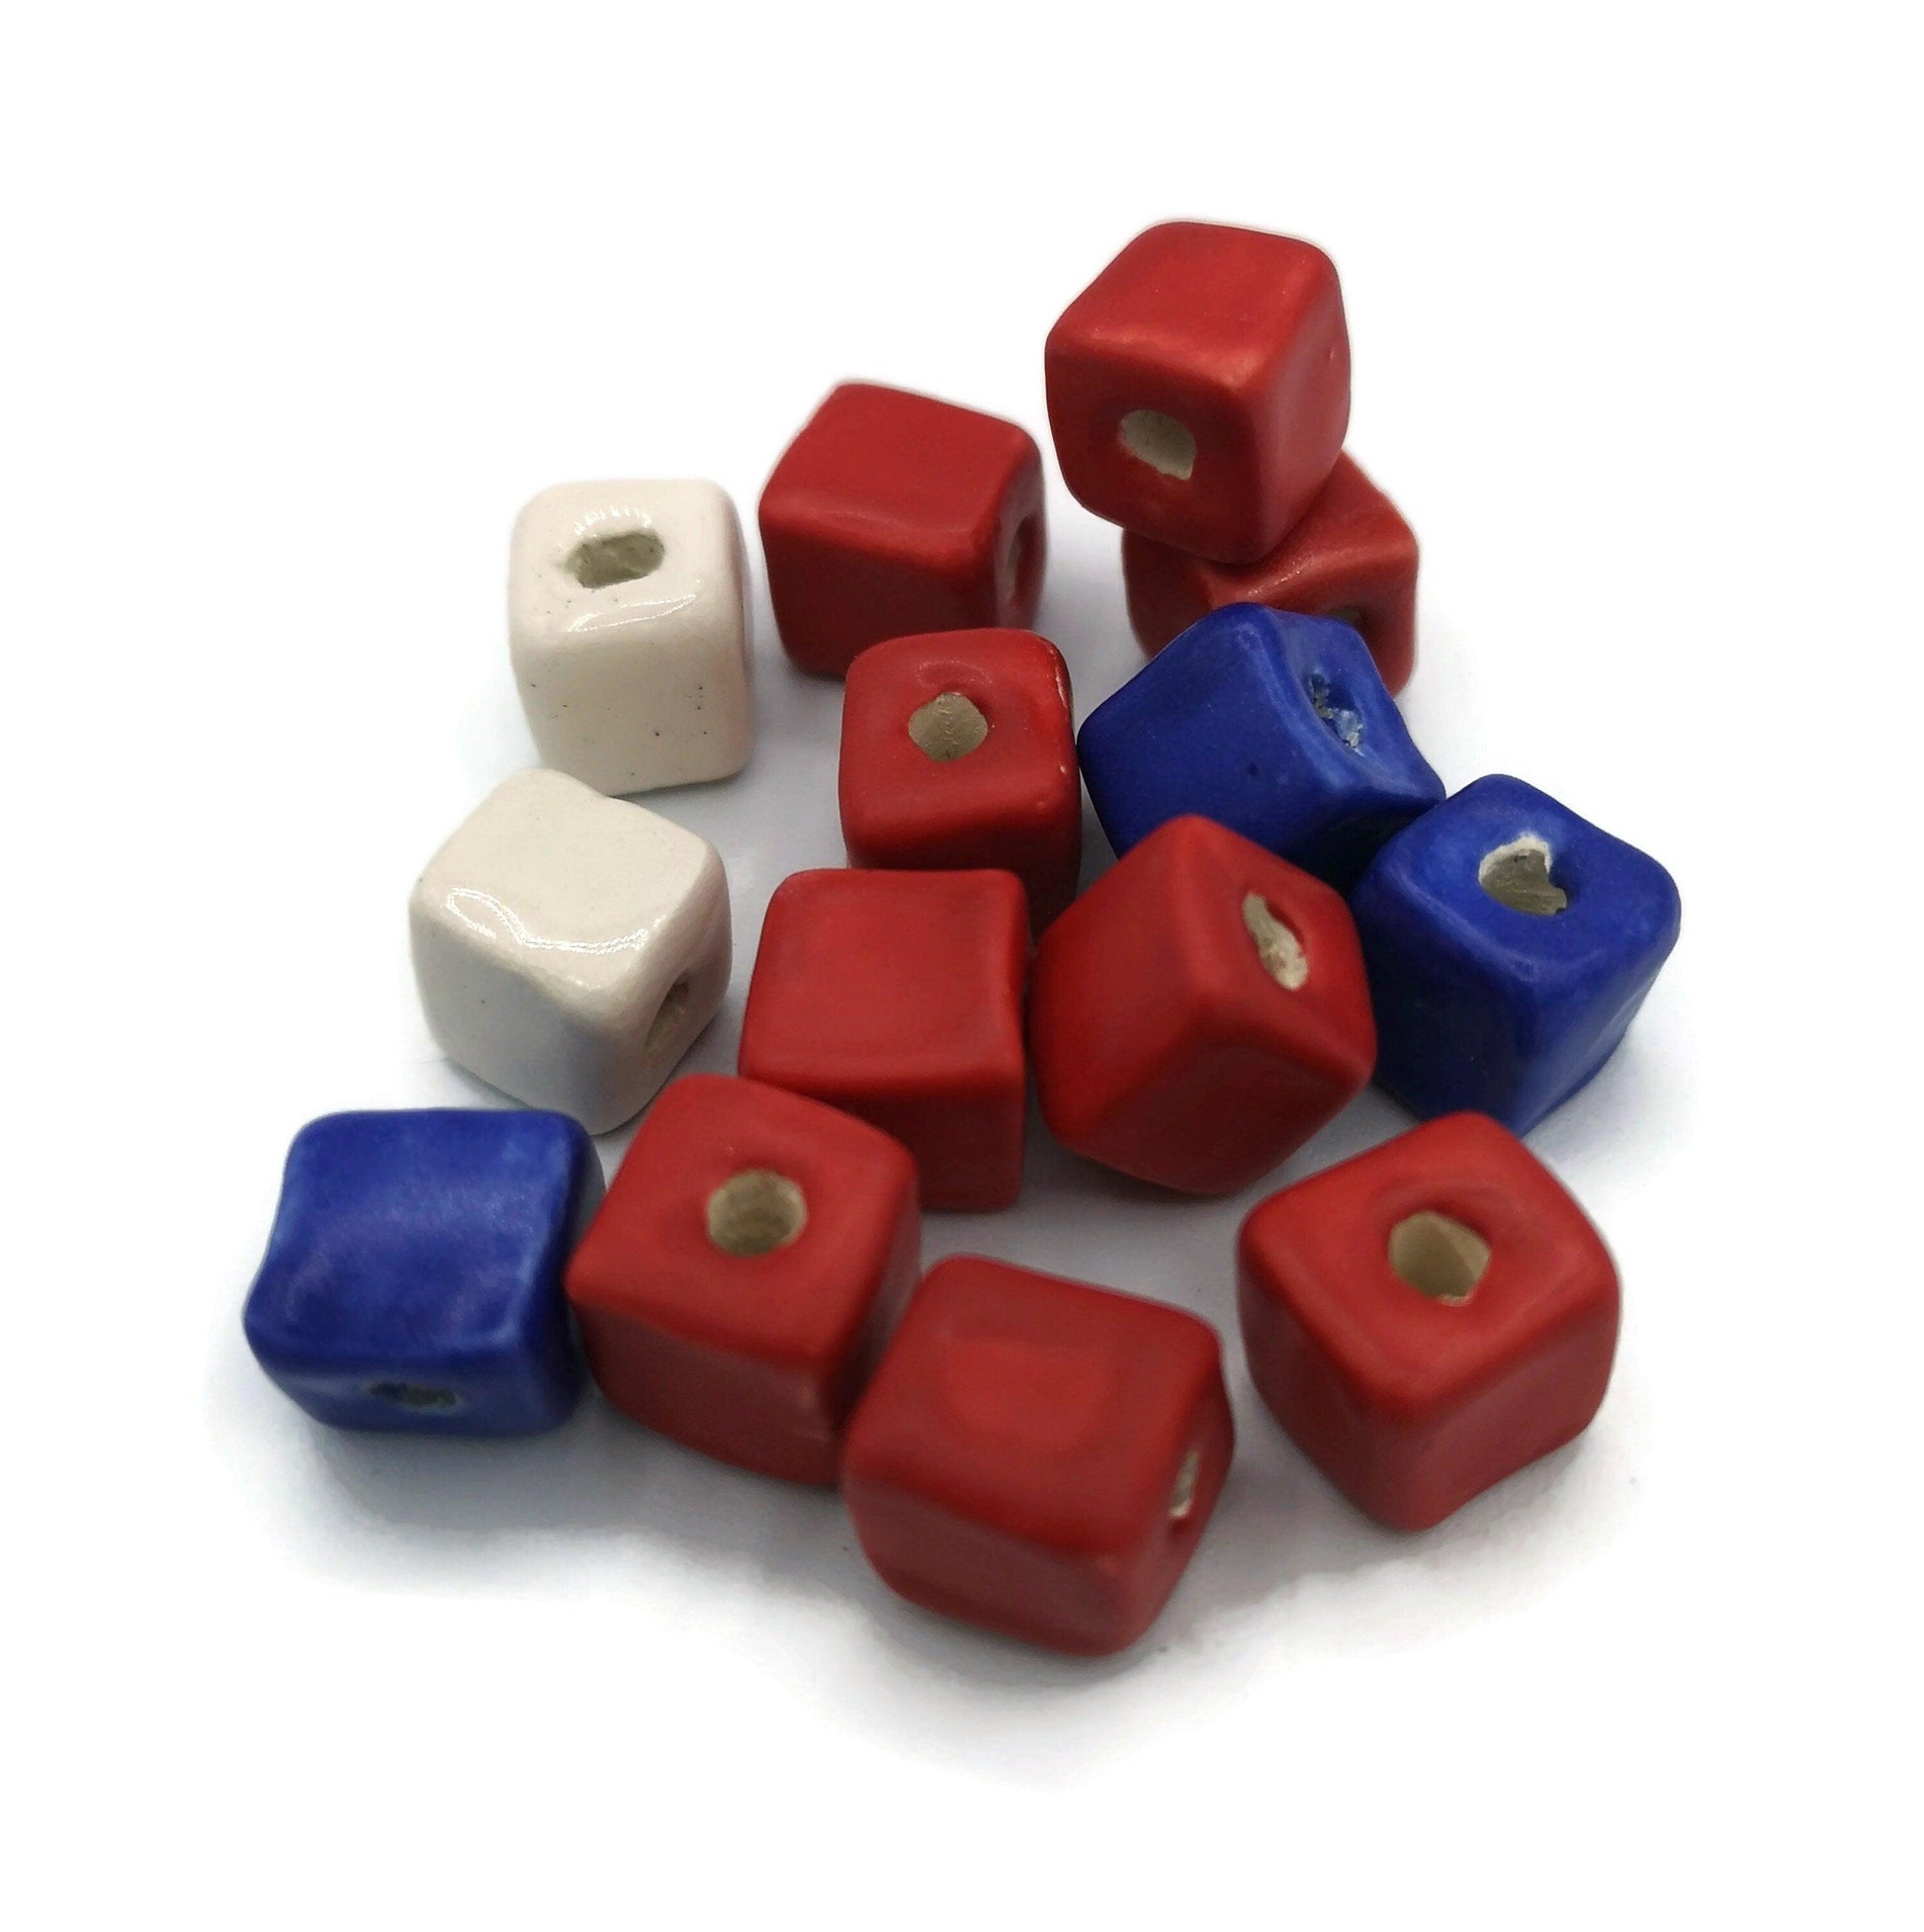 14 Pc Square Ceramic Beads Set, Assorted Royal Blue Red And White Porcelain Beads 10mm, Handmade Clay Jewelry Making Beads - Ceramica Ana Rafael